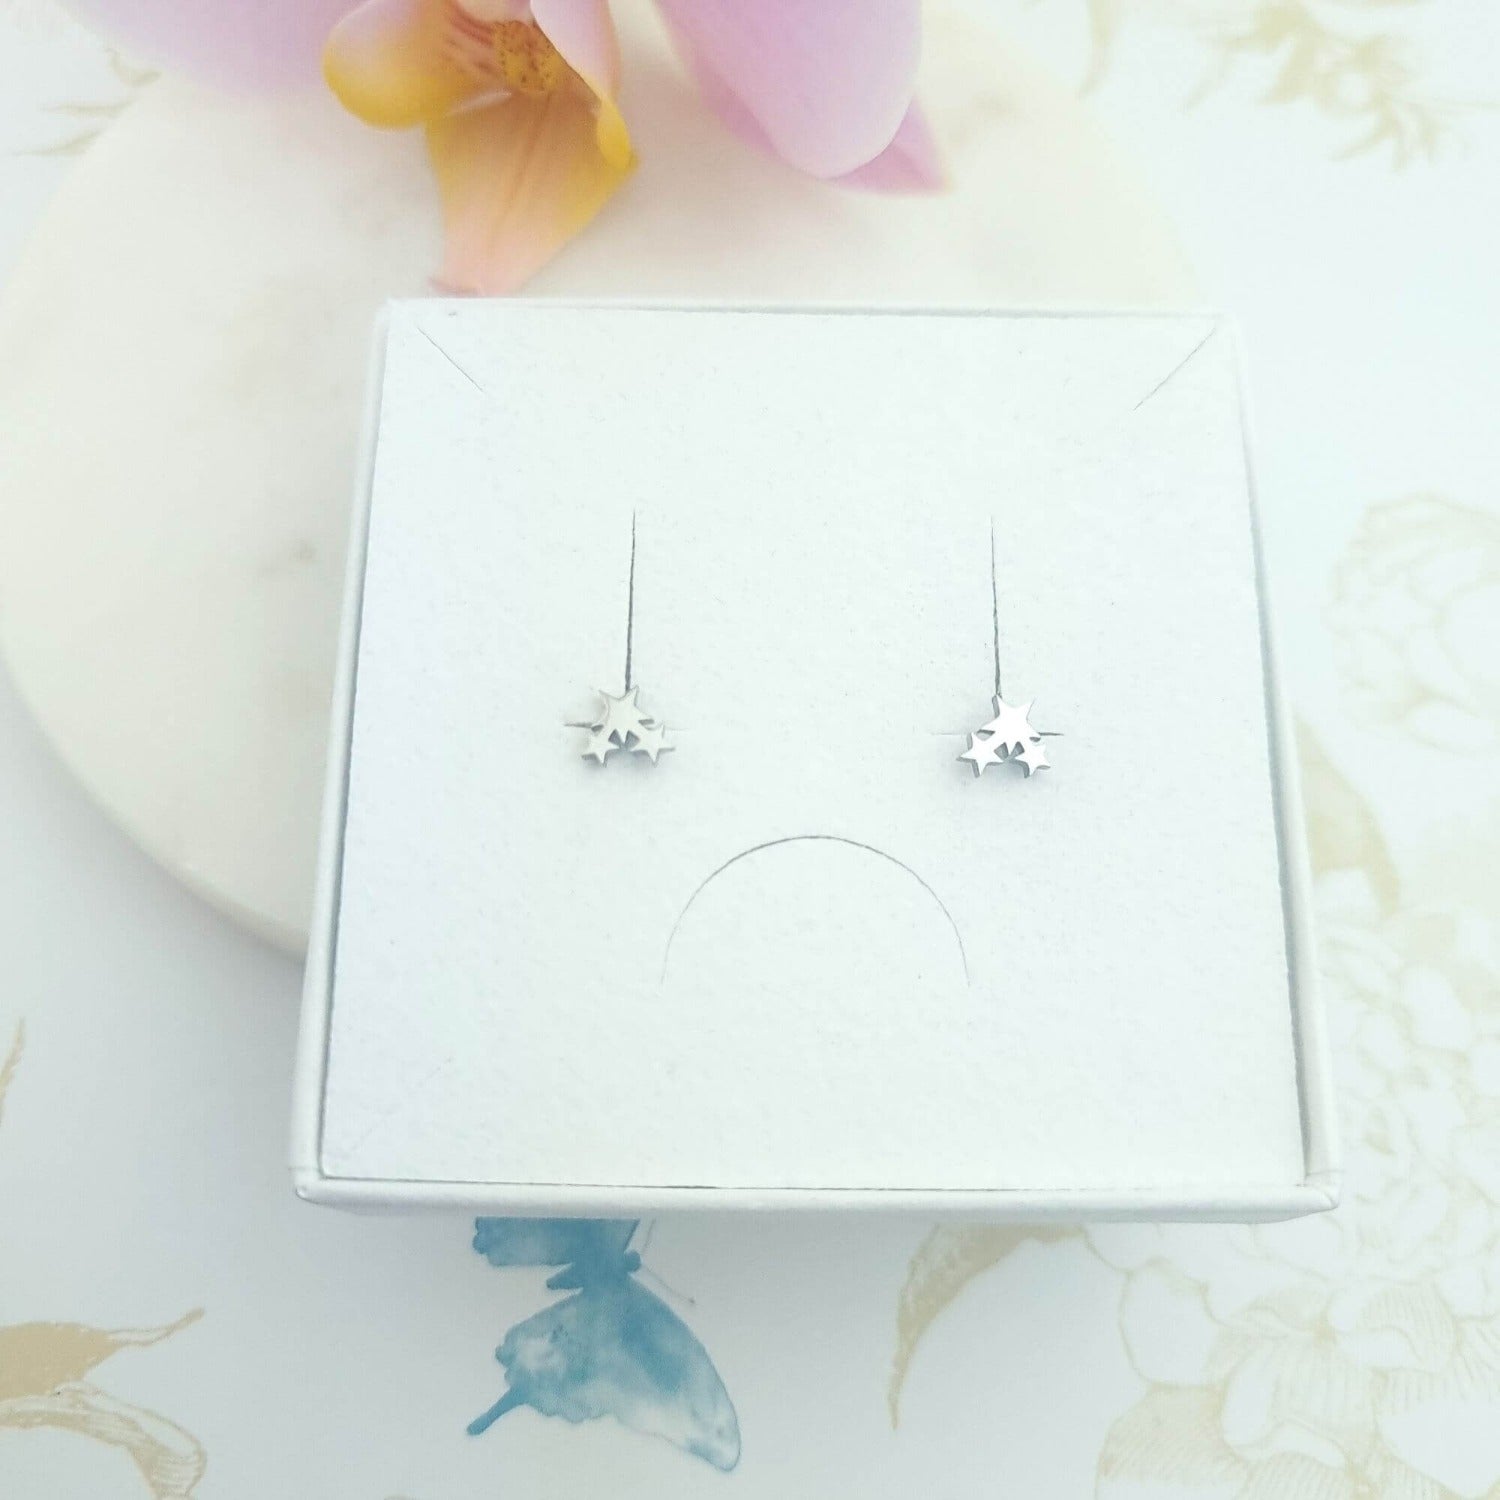 tiny trio of stars stud earrings in a gift box